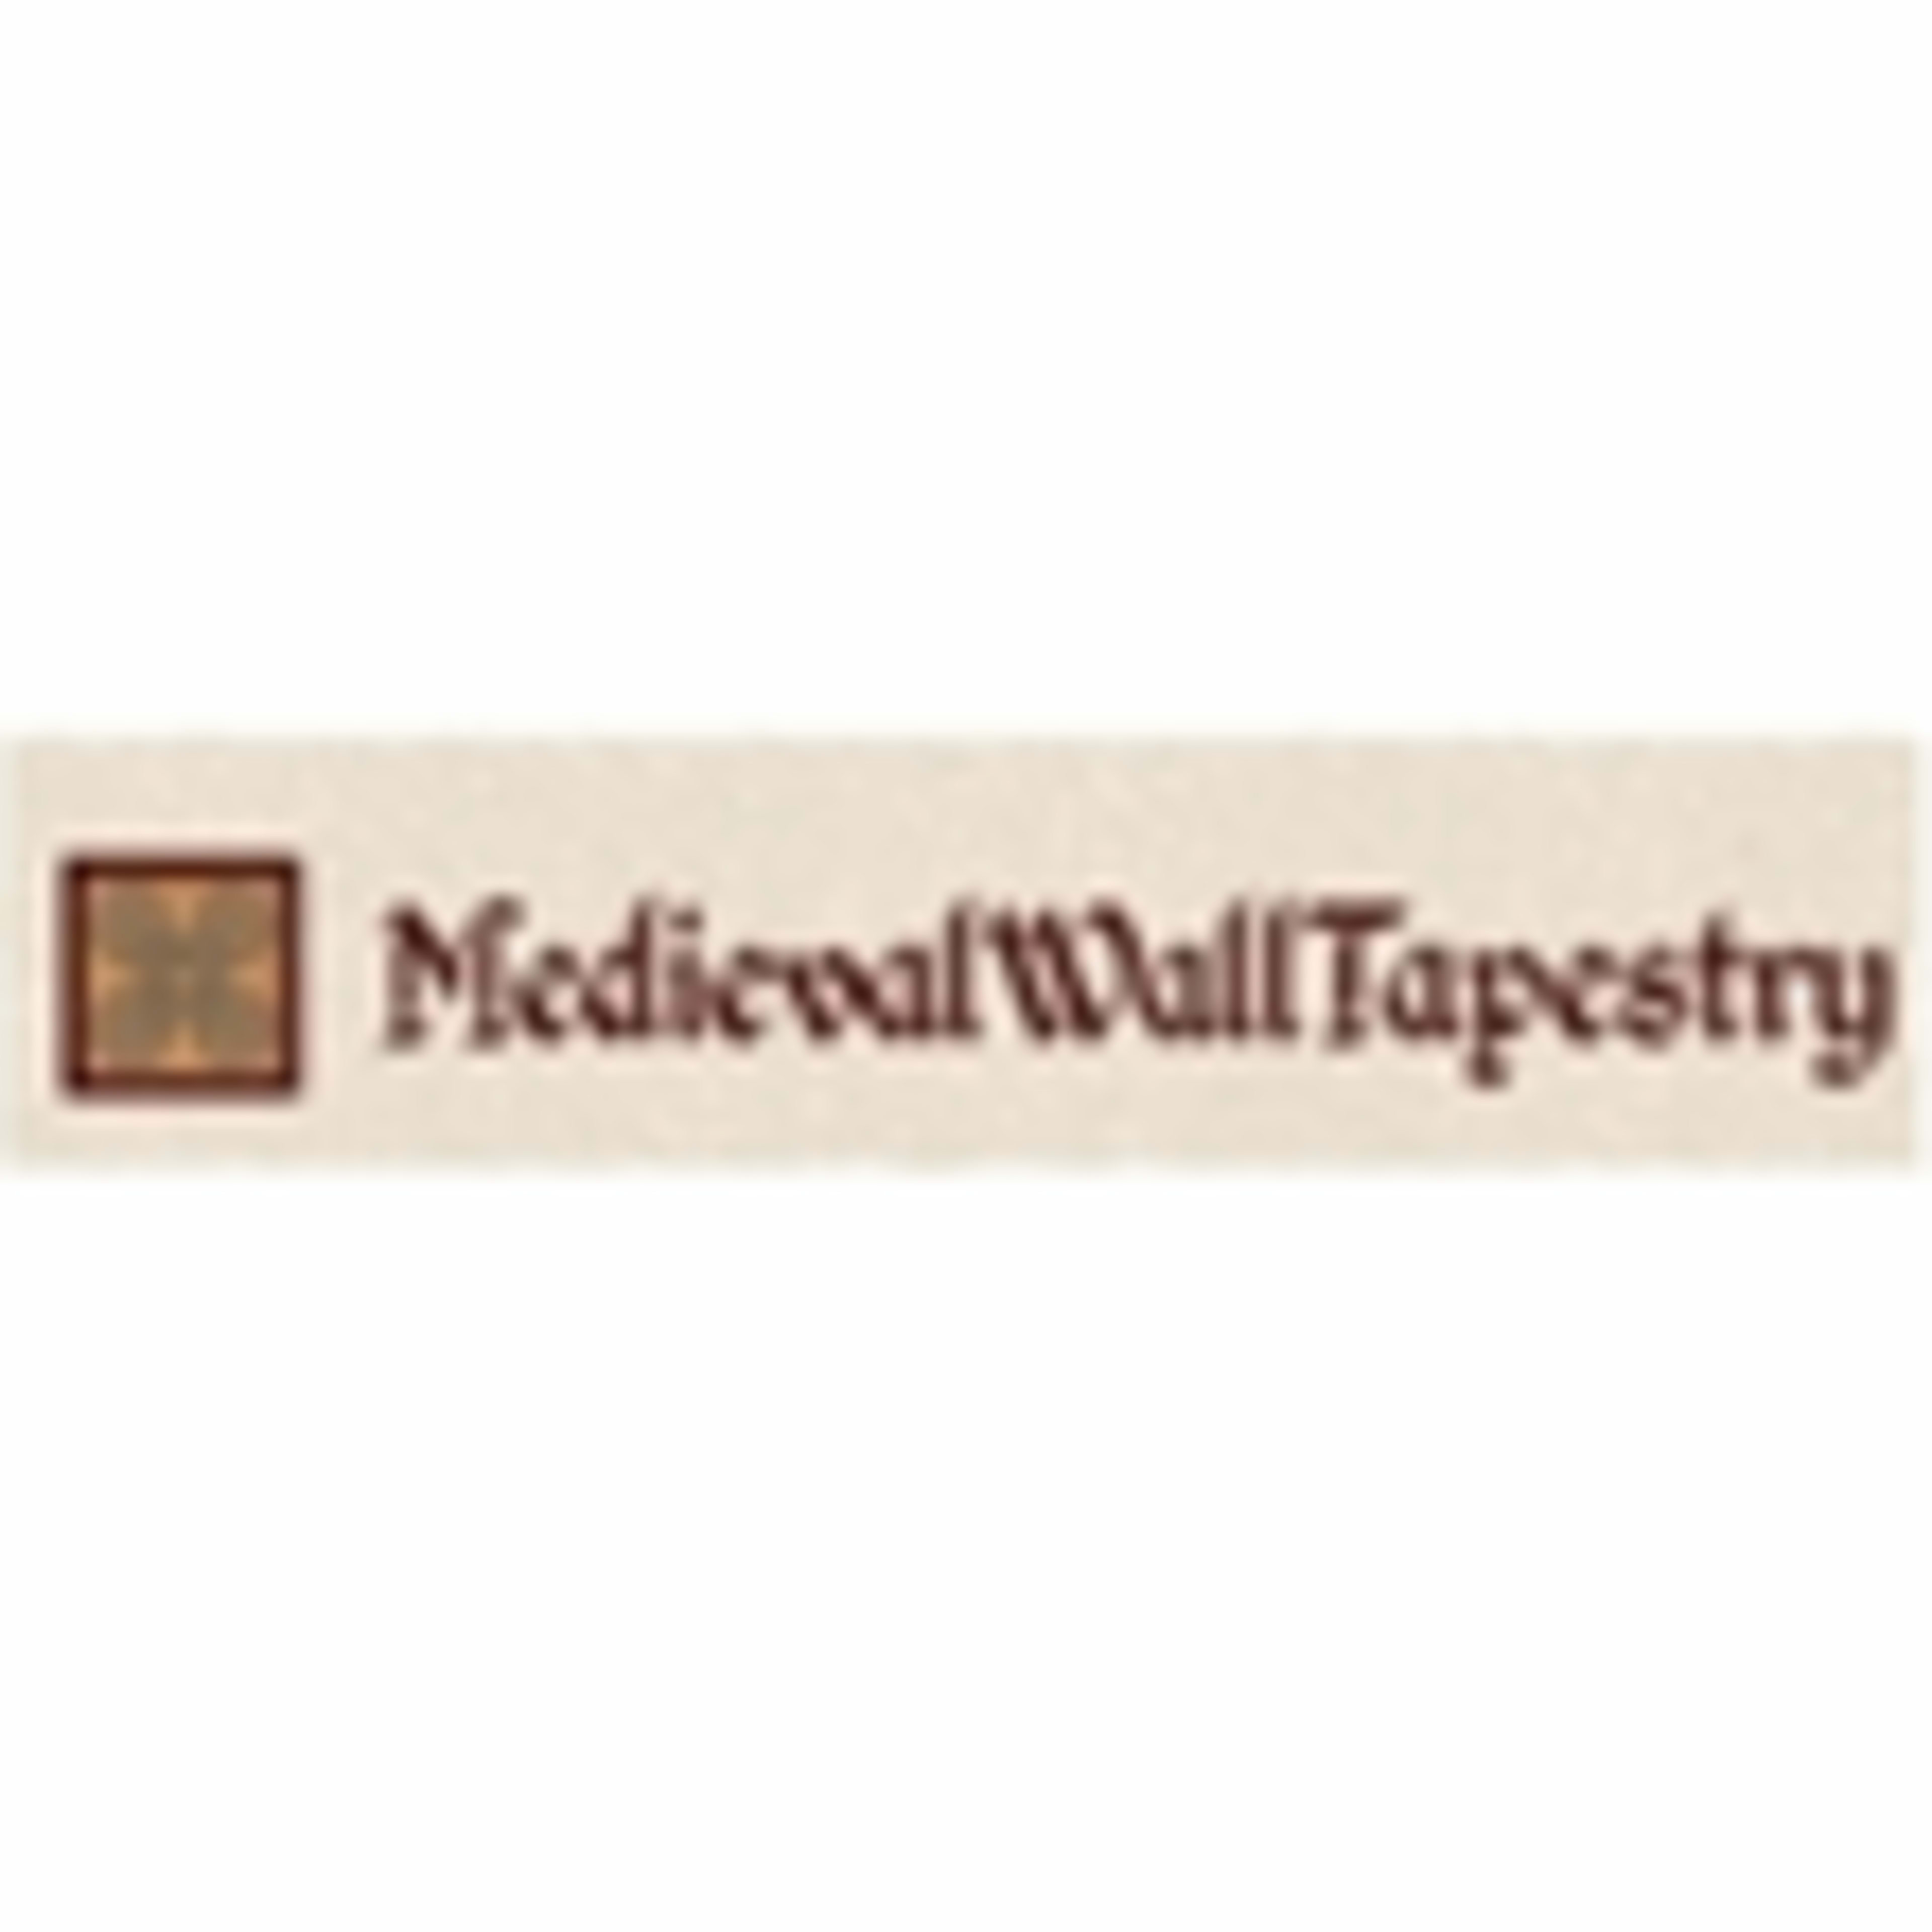 Medieval Wall TapestryCode